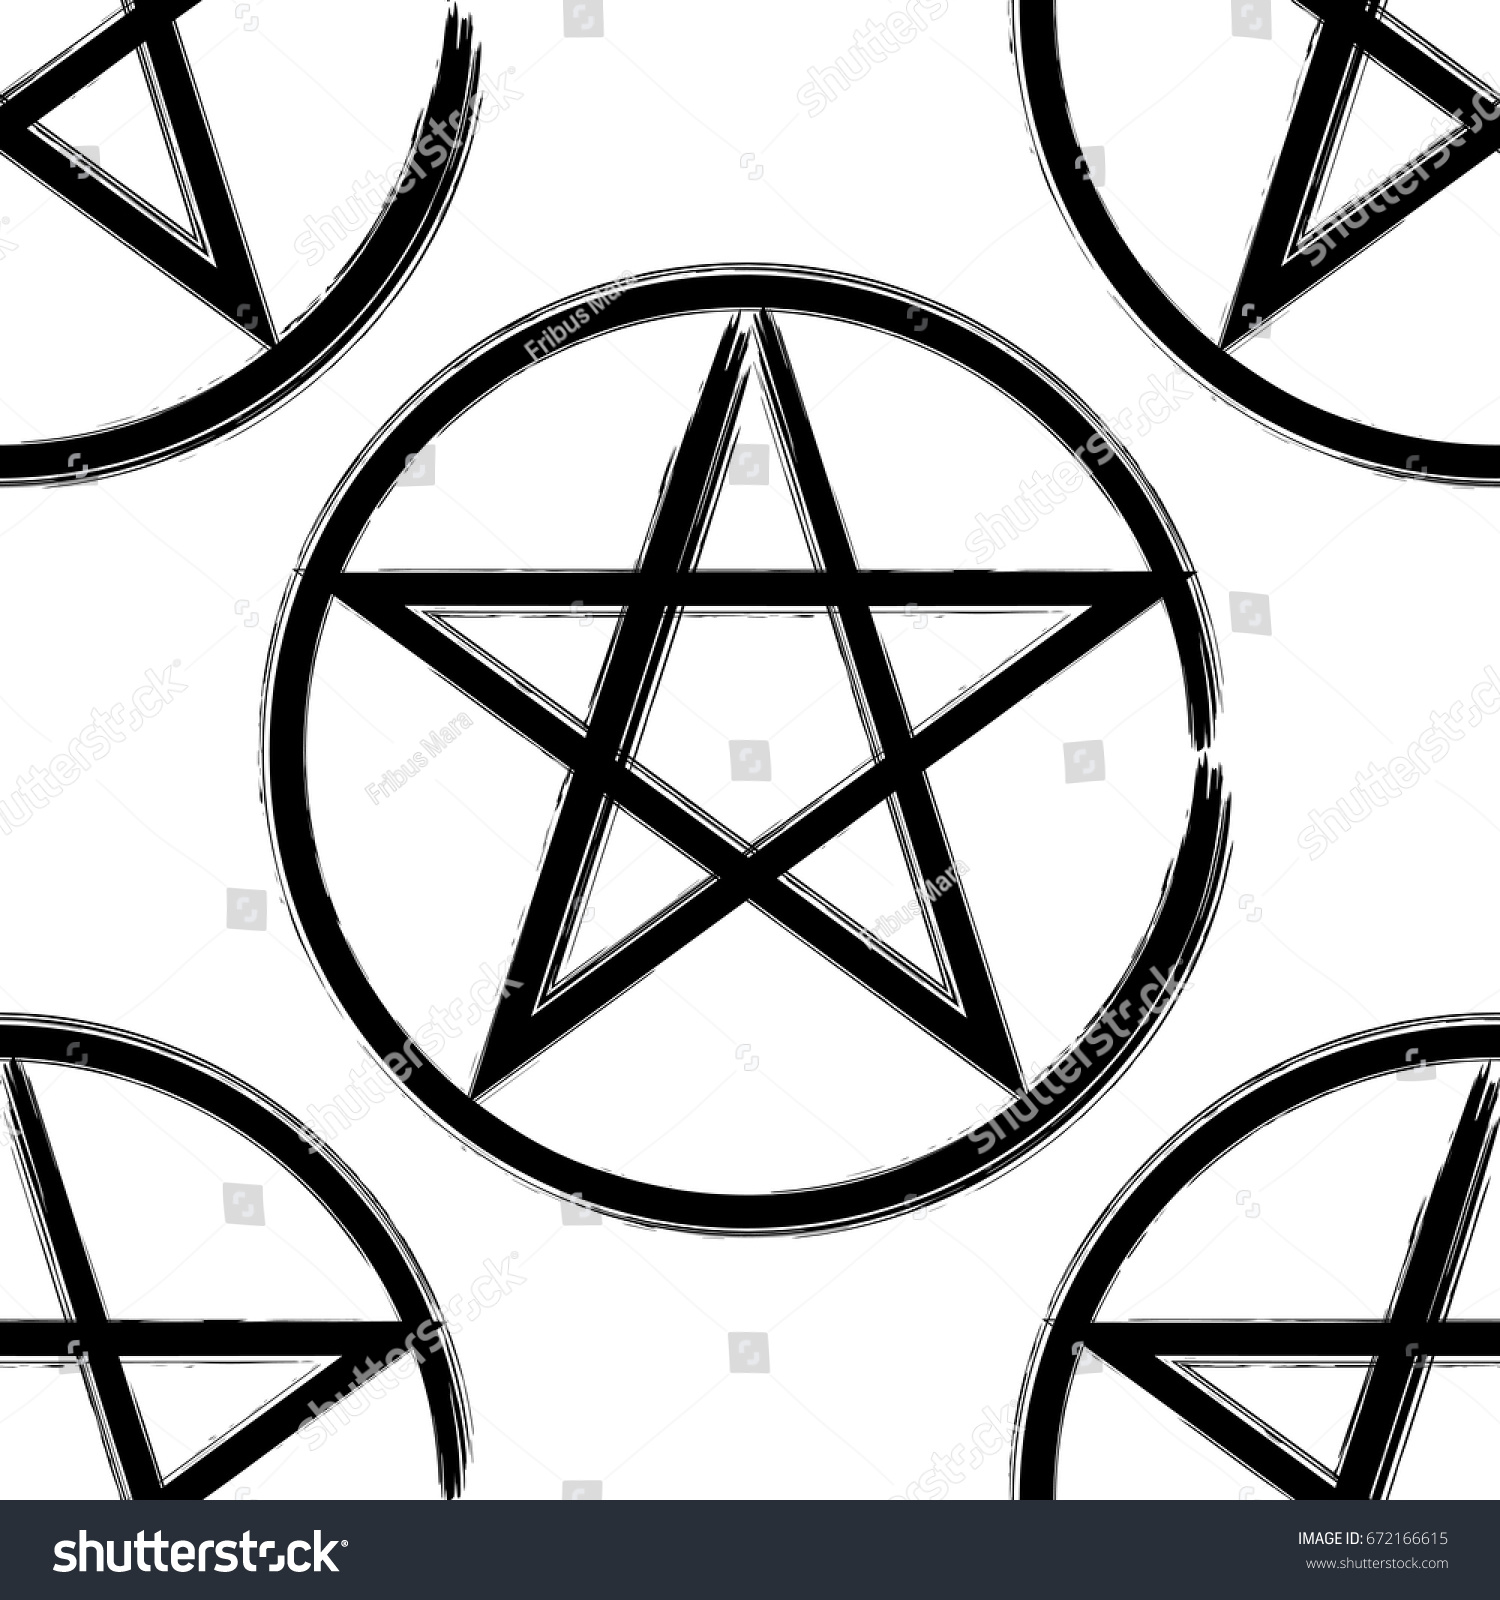 How To Draw A Pentagram In A Circle - Goimages Pro